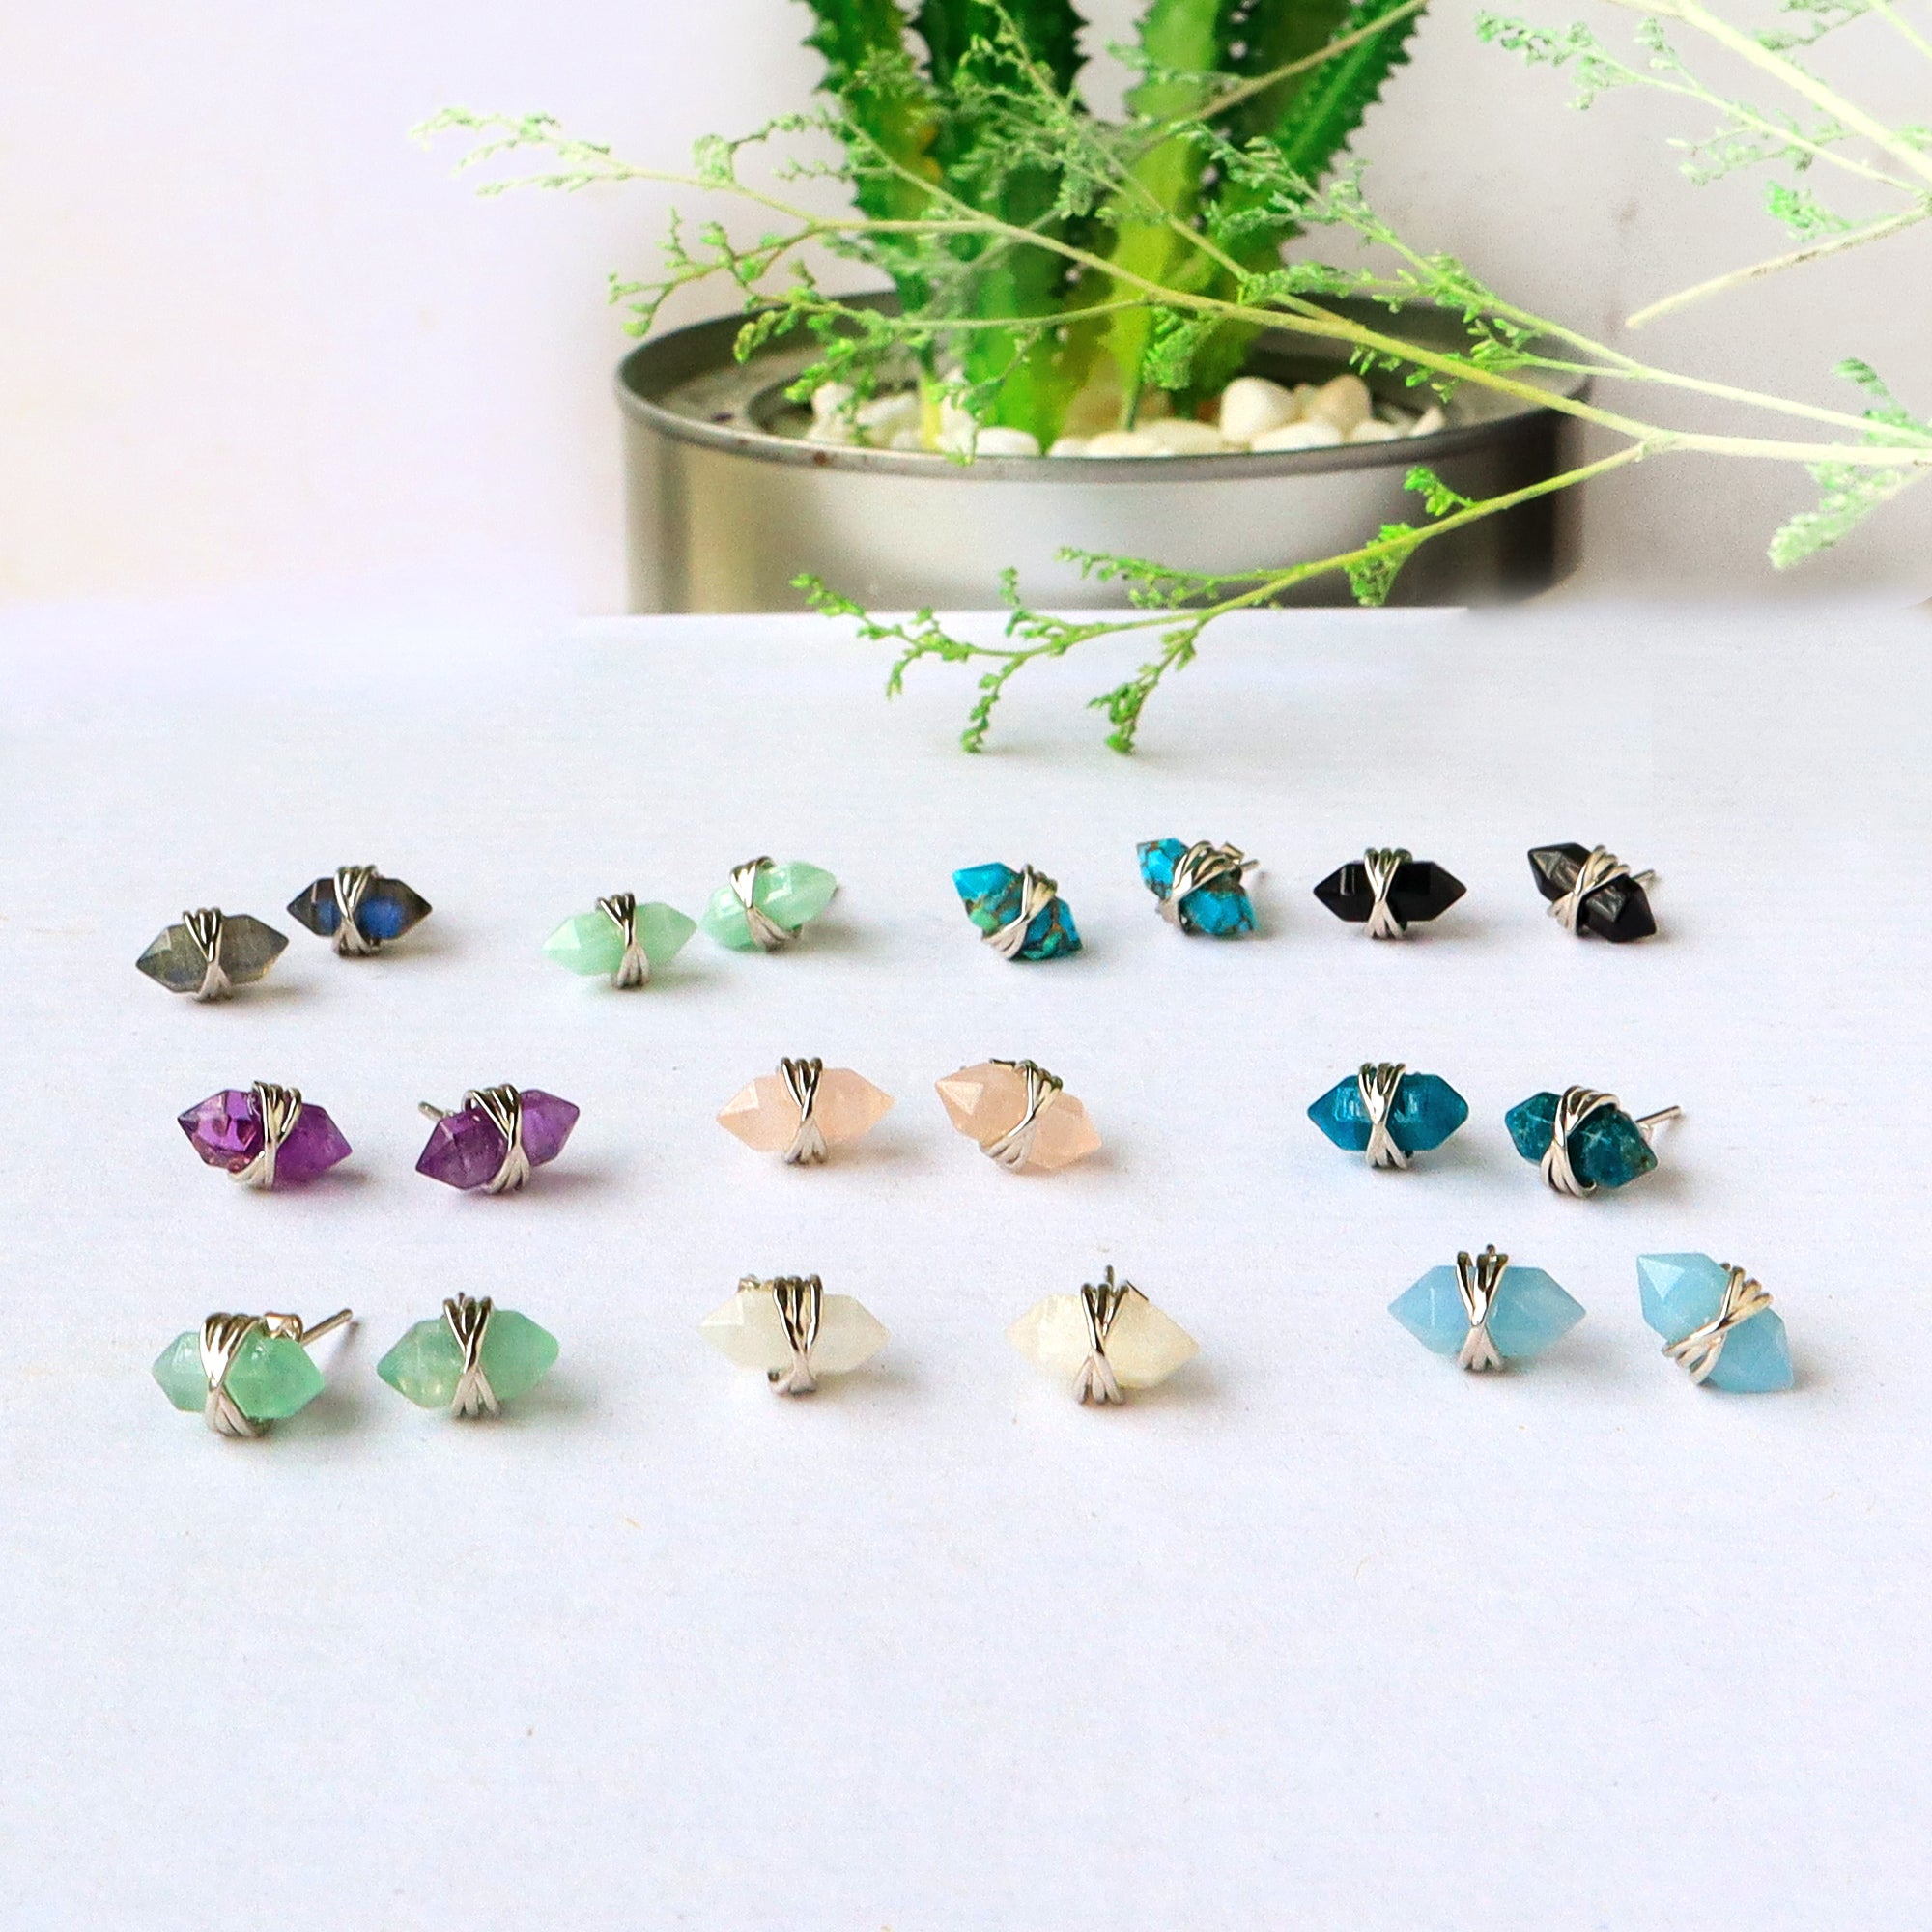 Silver Plated Natural Birthstone Stud Earrings, Tiny Hexagon Point Faceted Gemstone Earrings, Healing Crystal Post Earrings Jewelry BT002